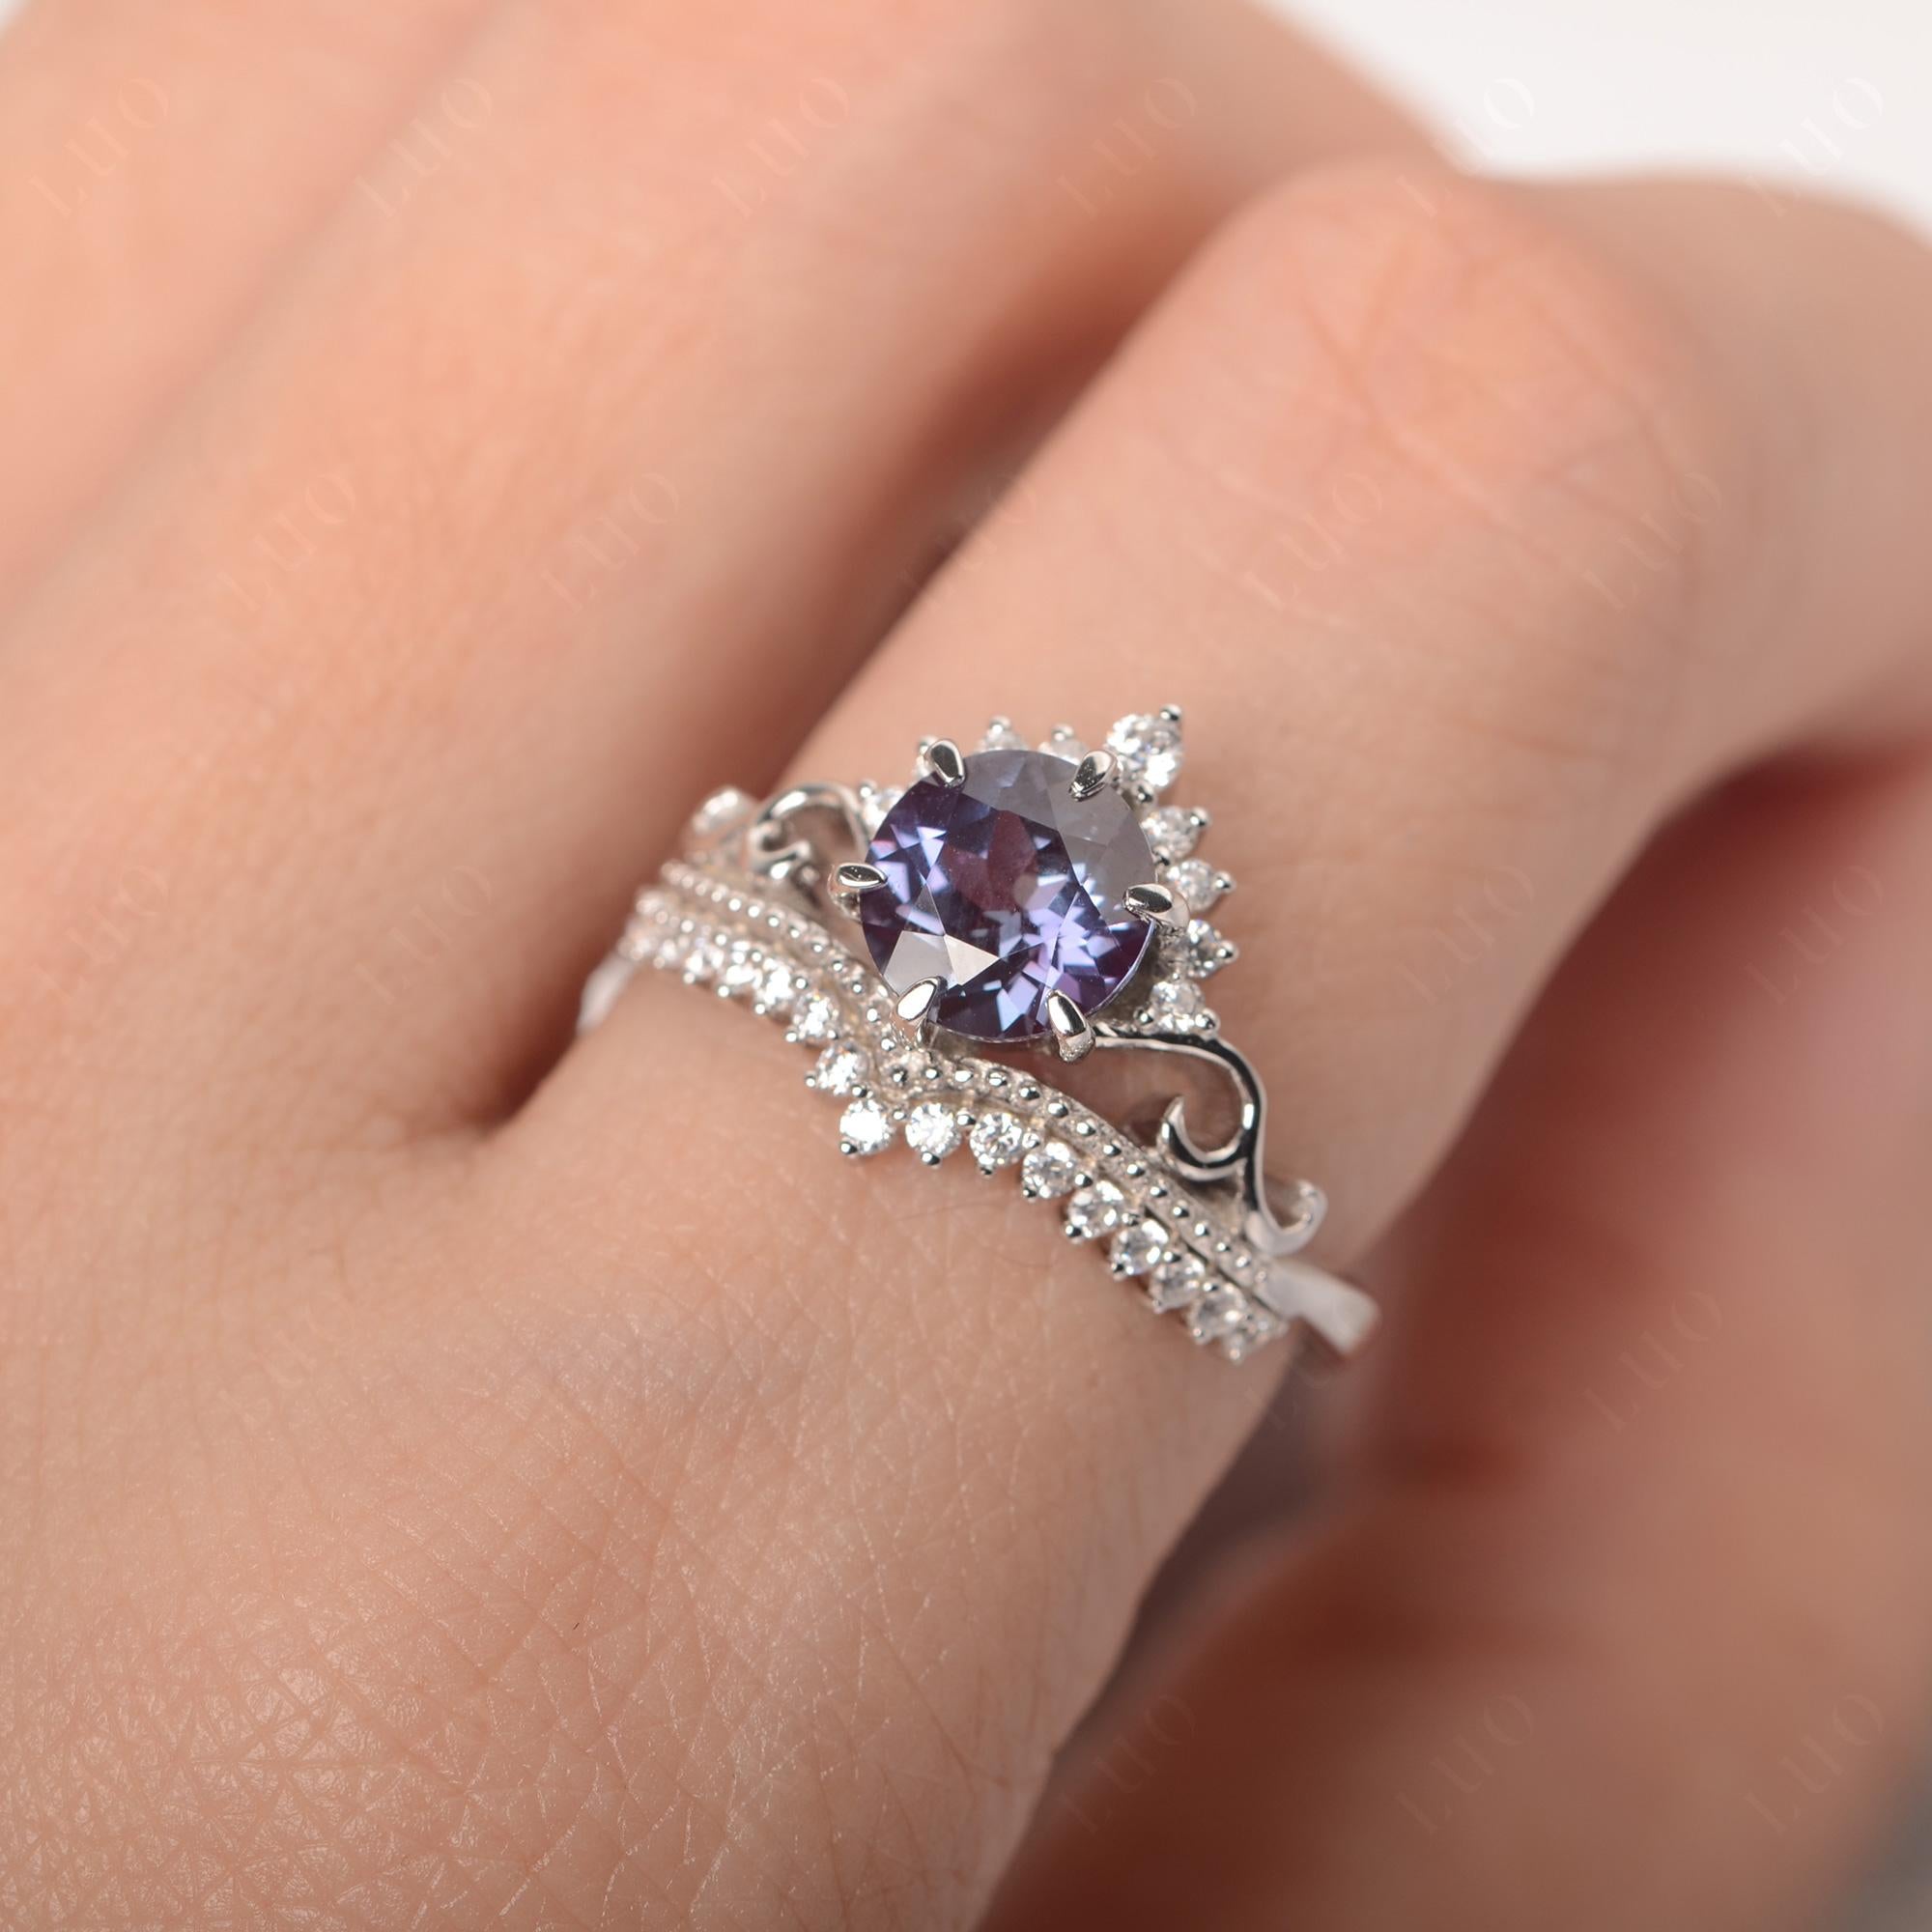 Vintage Lab Alexandrite Cocktail Ring - LUO Jewelry